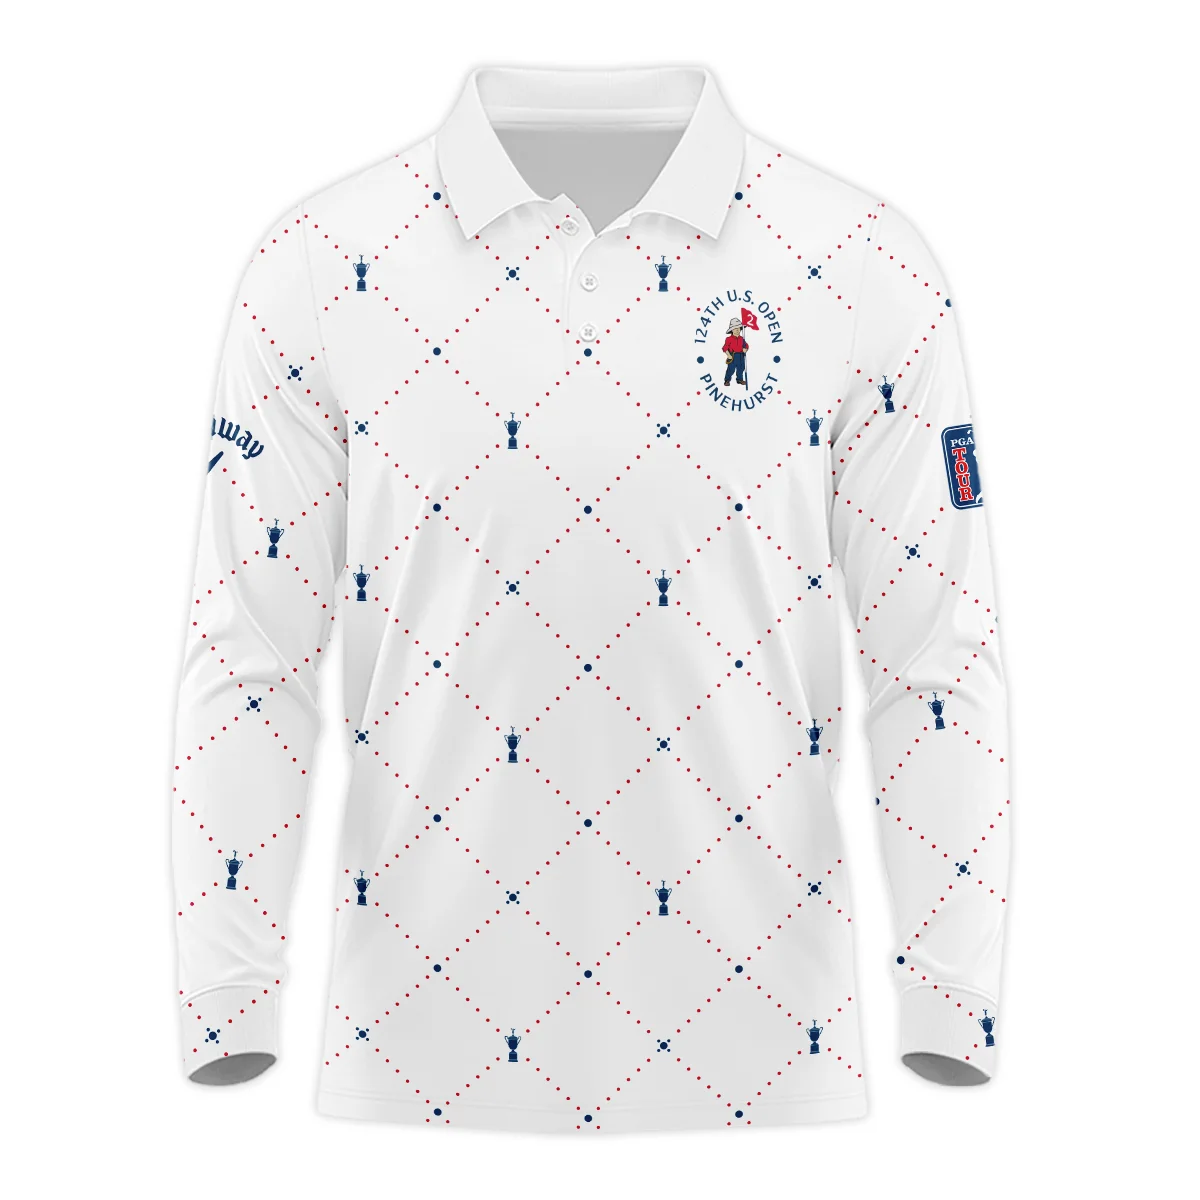 Argyle Pattern With Cup 124th U.S. Open Pinehurst Callaway Vneck Long Polo Shirt Style Classic Long Polo Shirt For Men